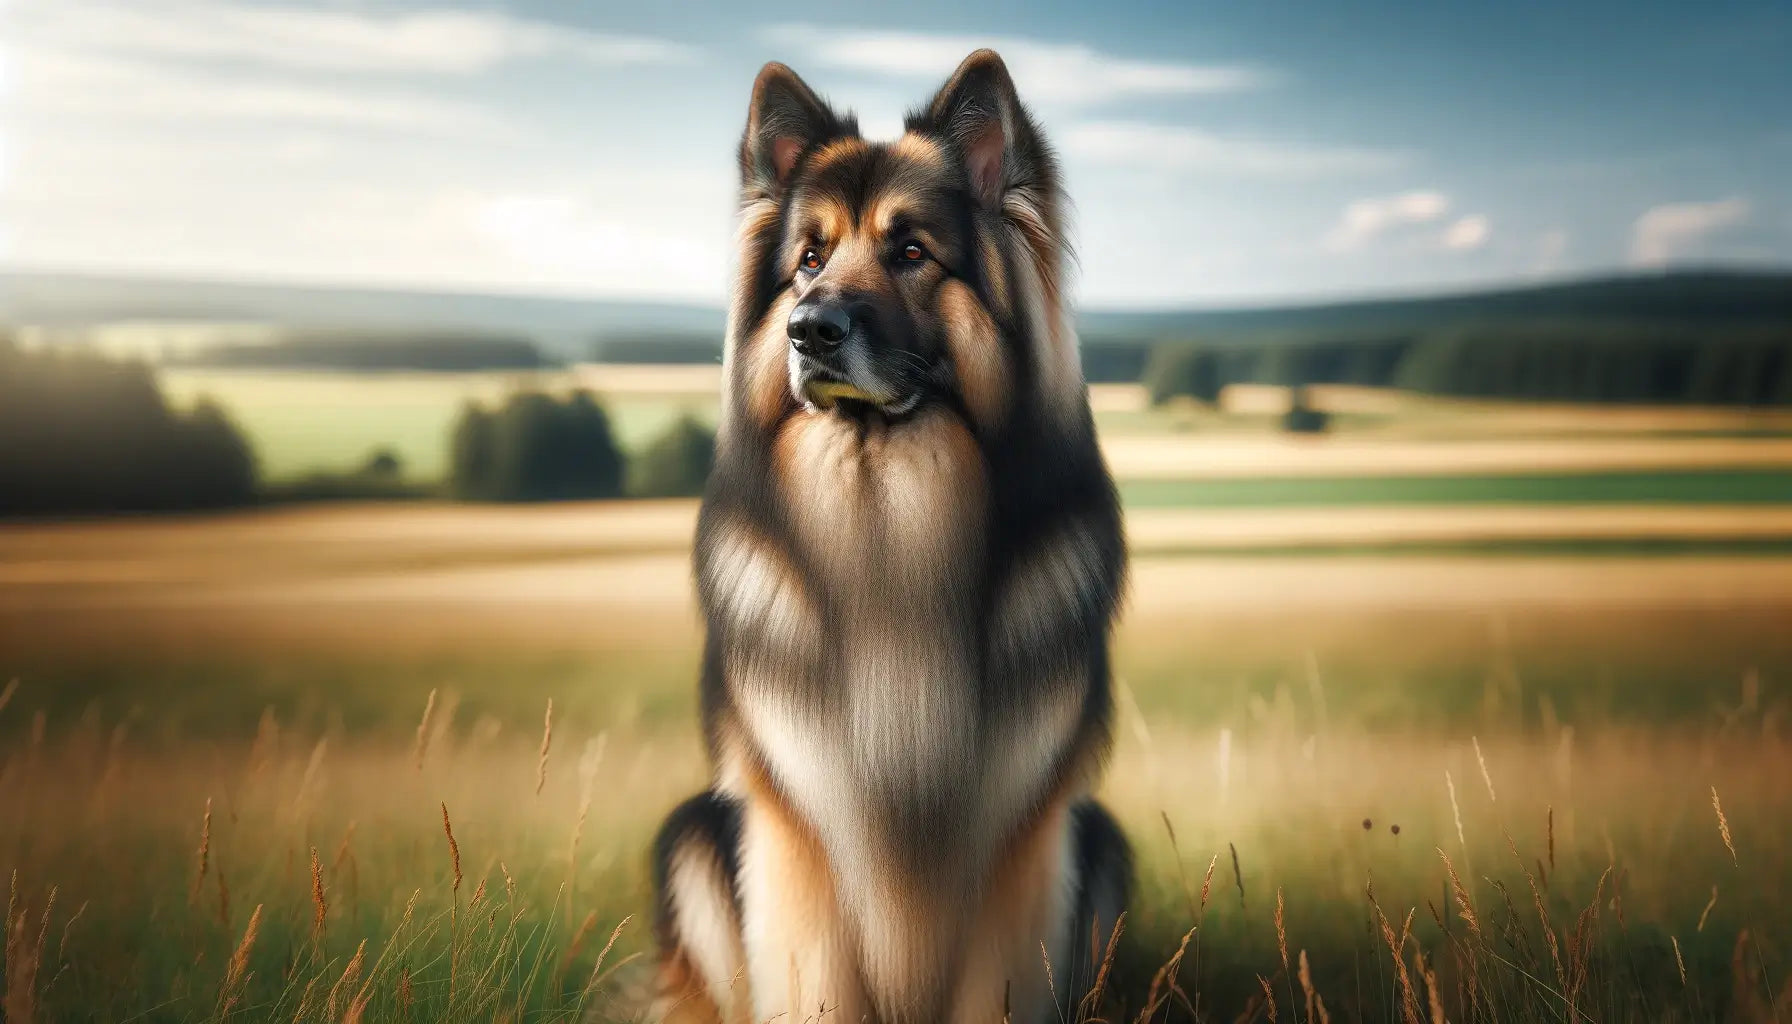 A Shiloh Shepherd standing on a grassy field, embodying a focused and noble expression.